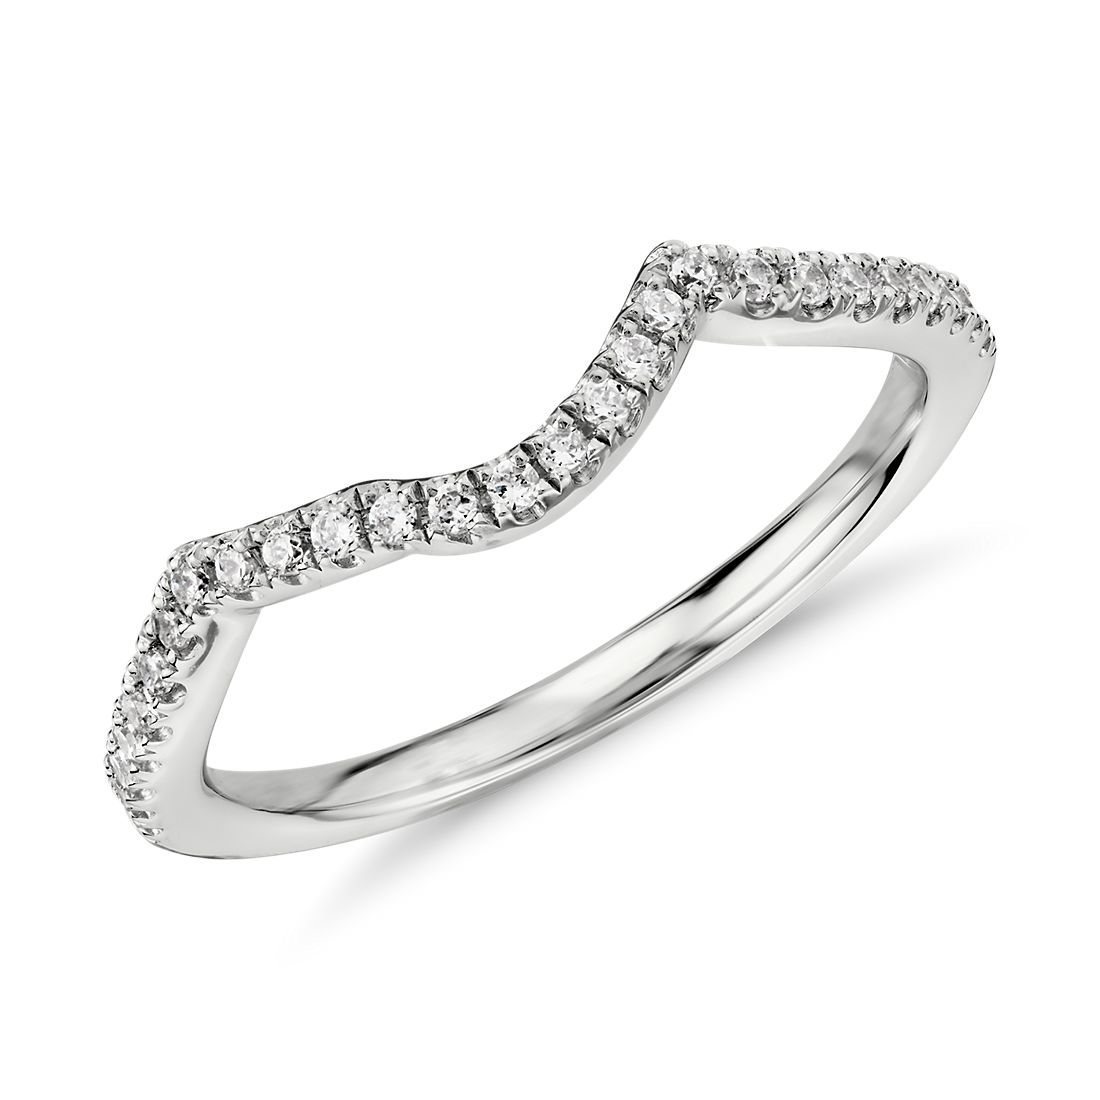 Twist Curved Diamond Ring in 14k White Gold